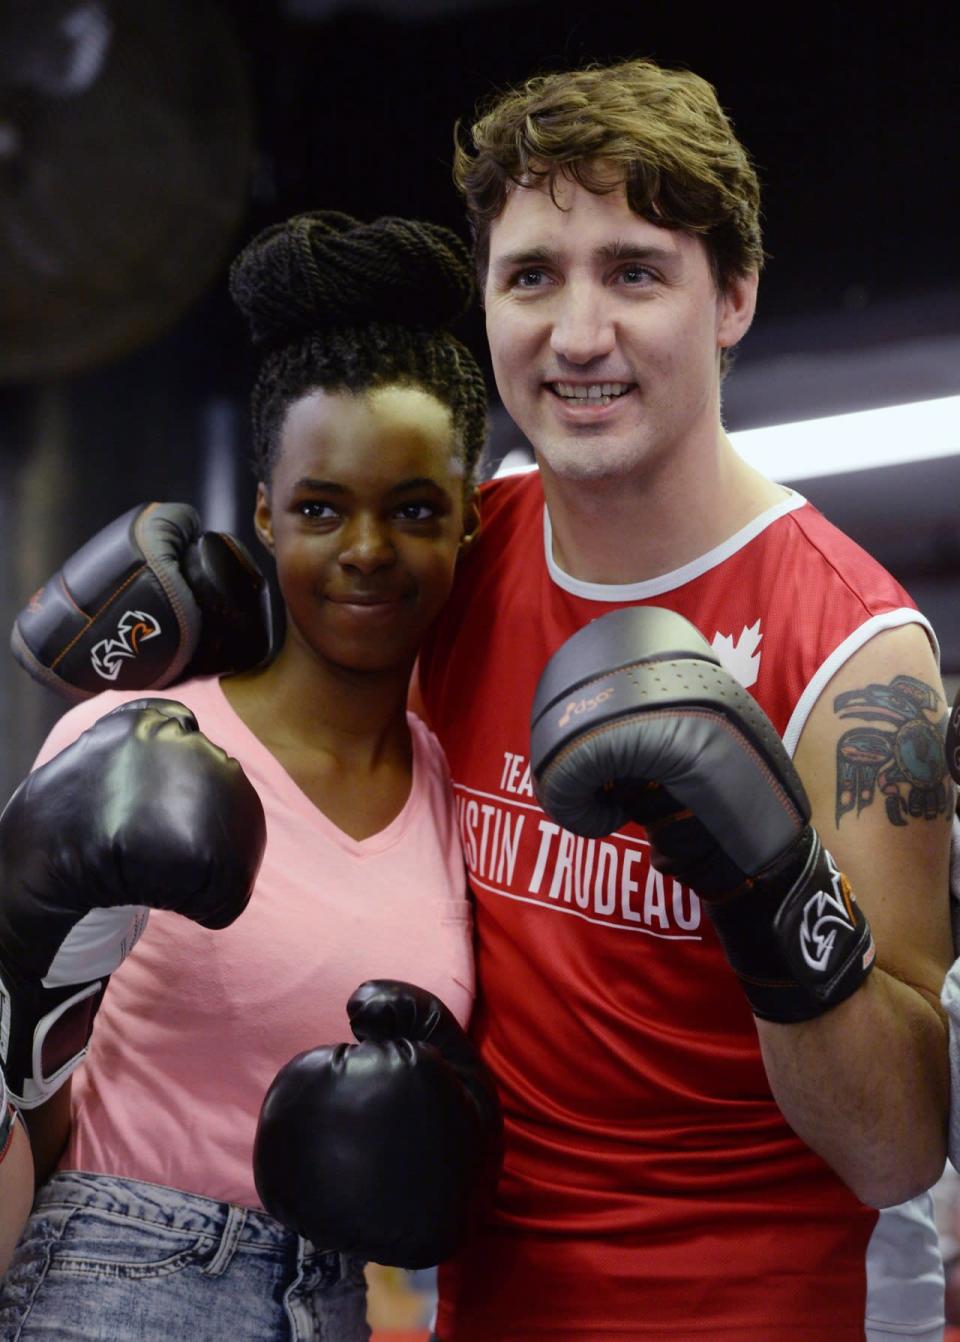 Prime Minister Justin Trudeau poses for a photo with Ayanna, 14, as he visits Gleason’s Boxing Gym in Brooklyn, New York on Thursday, April 21, 2016. THE CANADIAN PRESS/Sean Kilpatrick